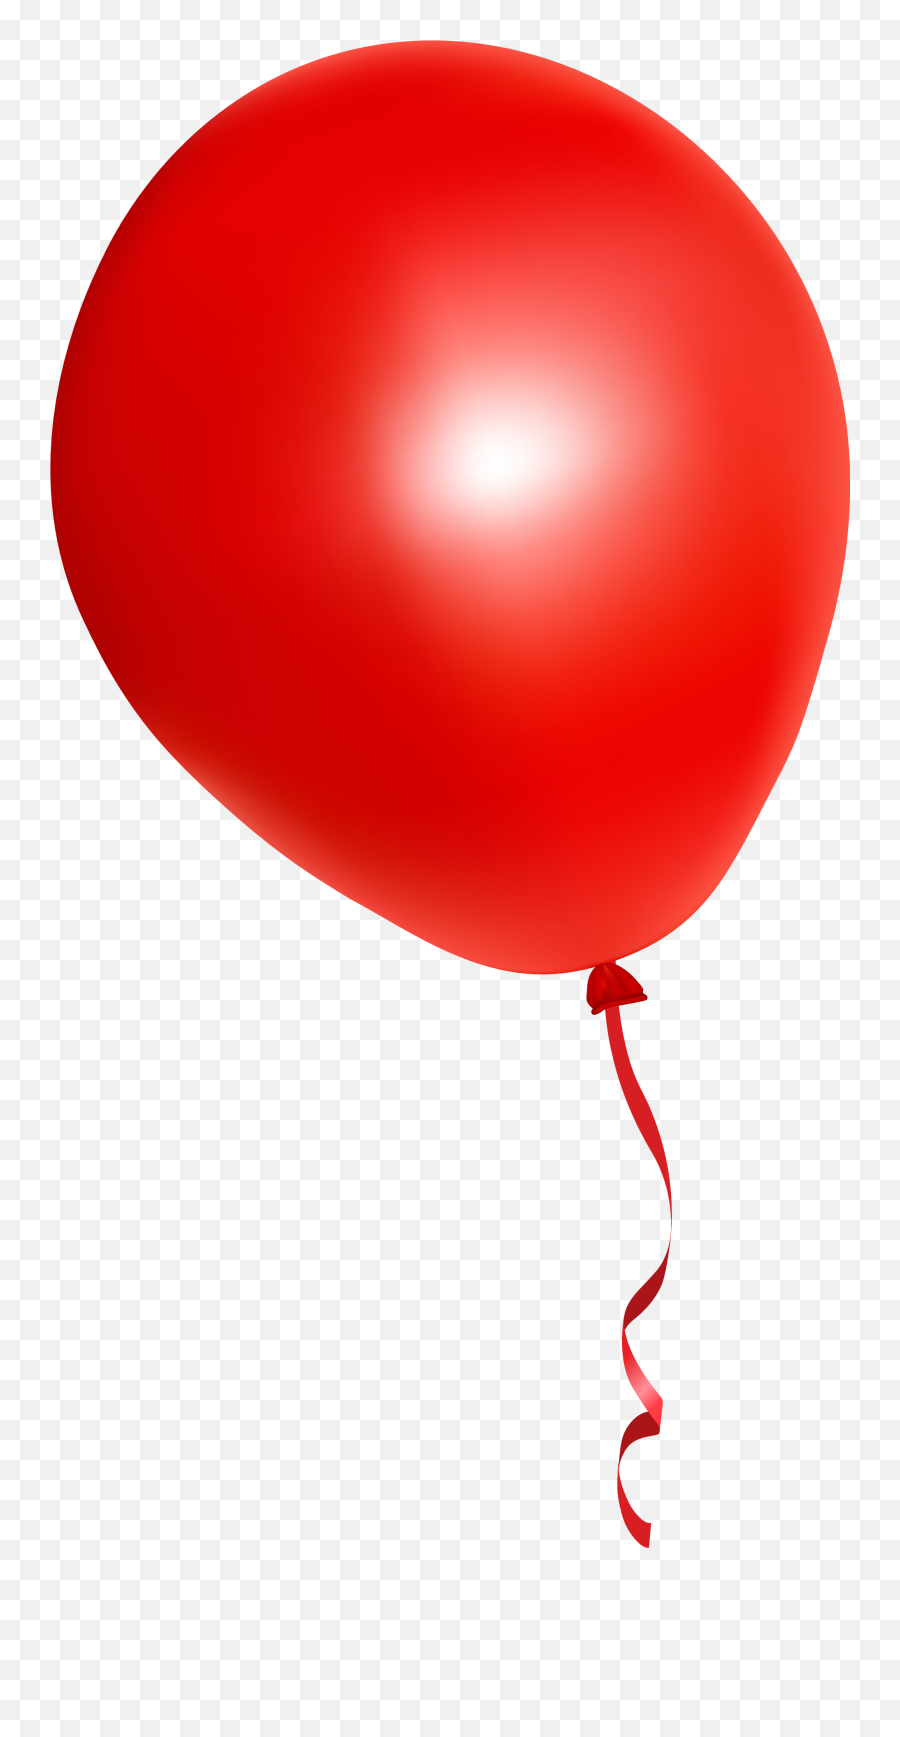 Download Hd Image Result For Red Balloon Transparent Psycho - Red Balloon It Png Emoji,Red Balloon Emoji